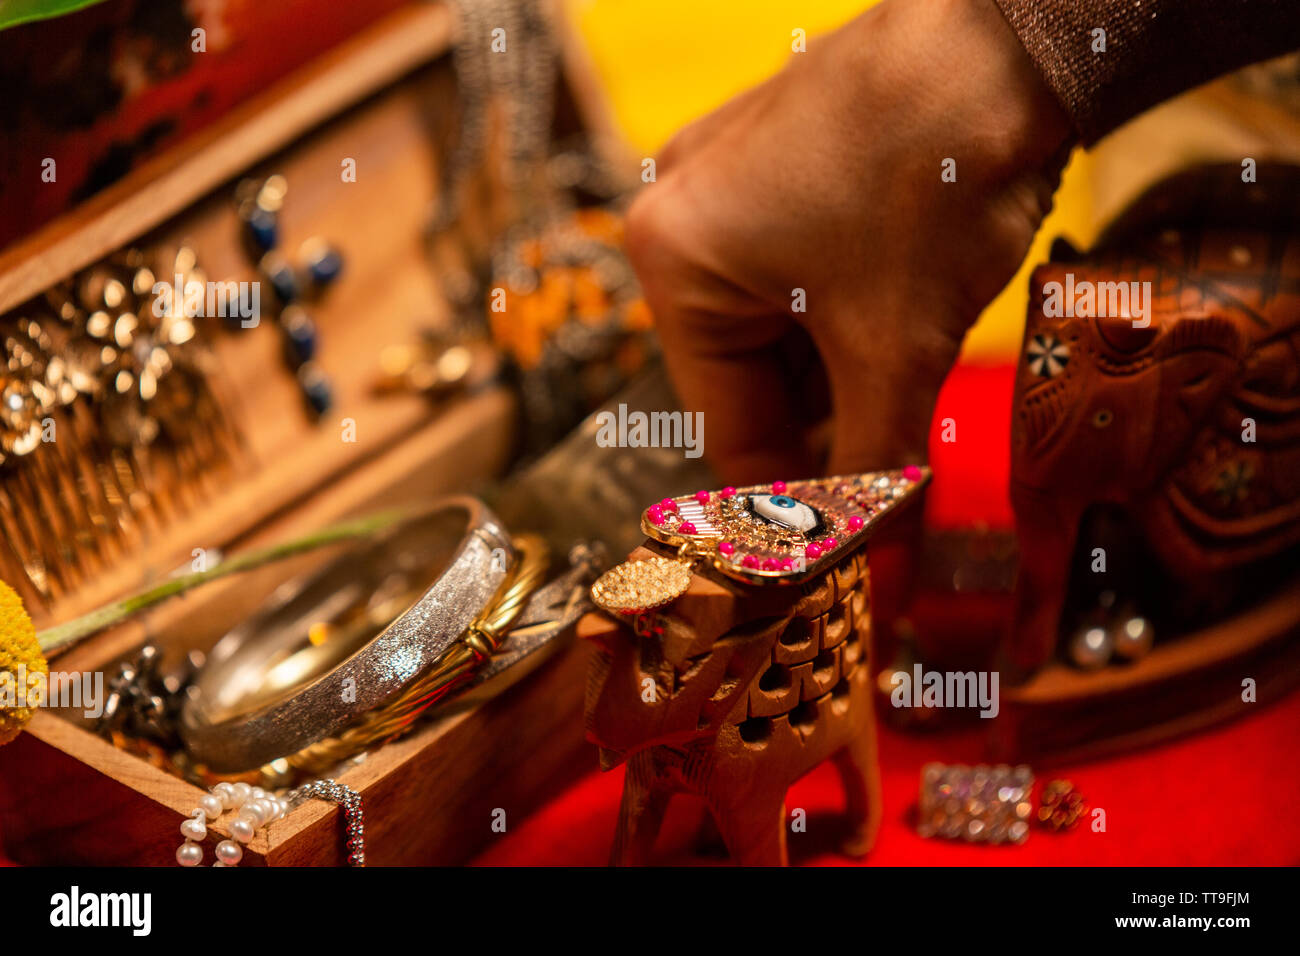 Cropped Hand decorationg Table with Jewellery Stock Photo